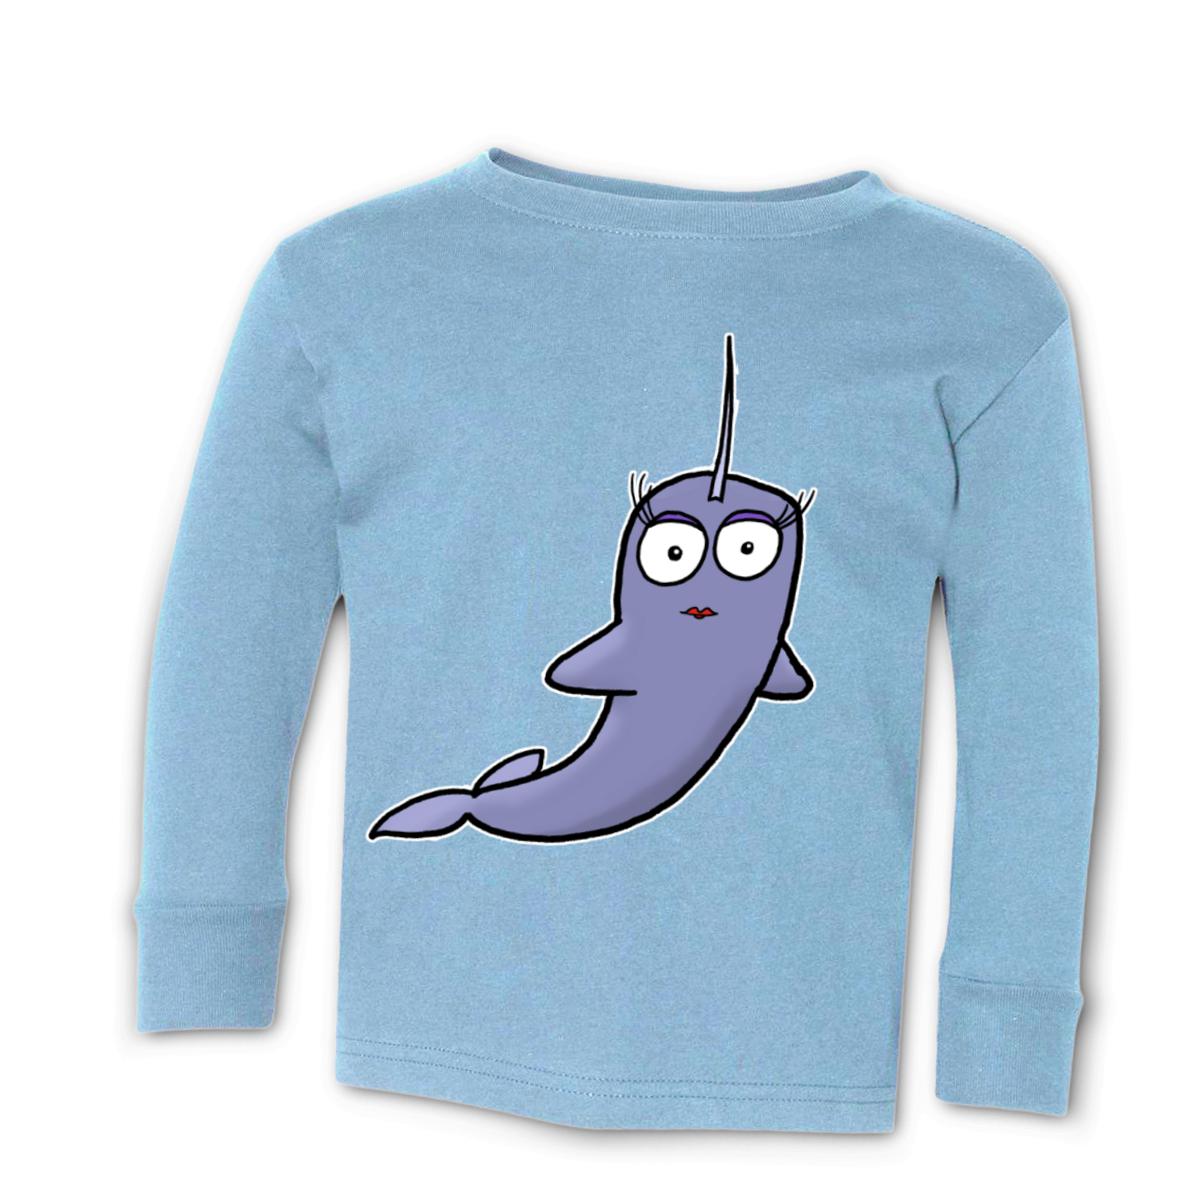 Narwhal Kid's Long Sleeve Tee Small light-blue